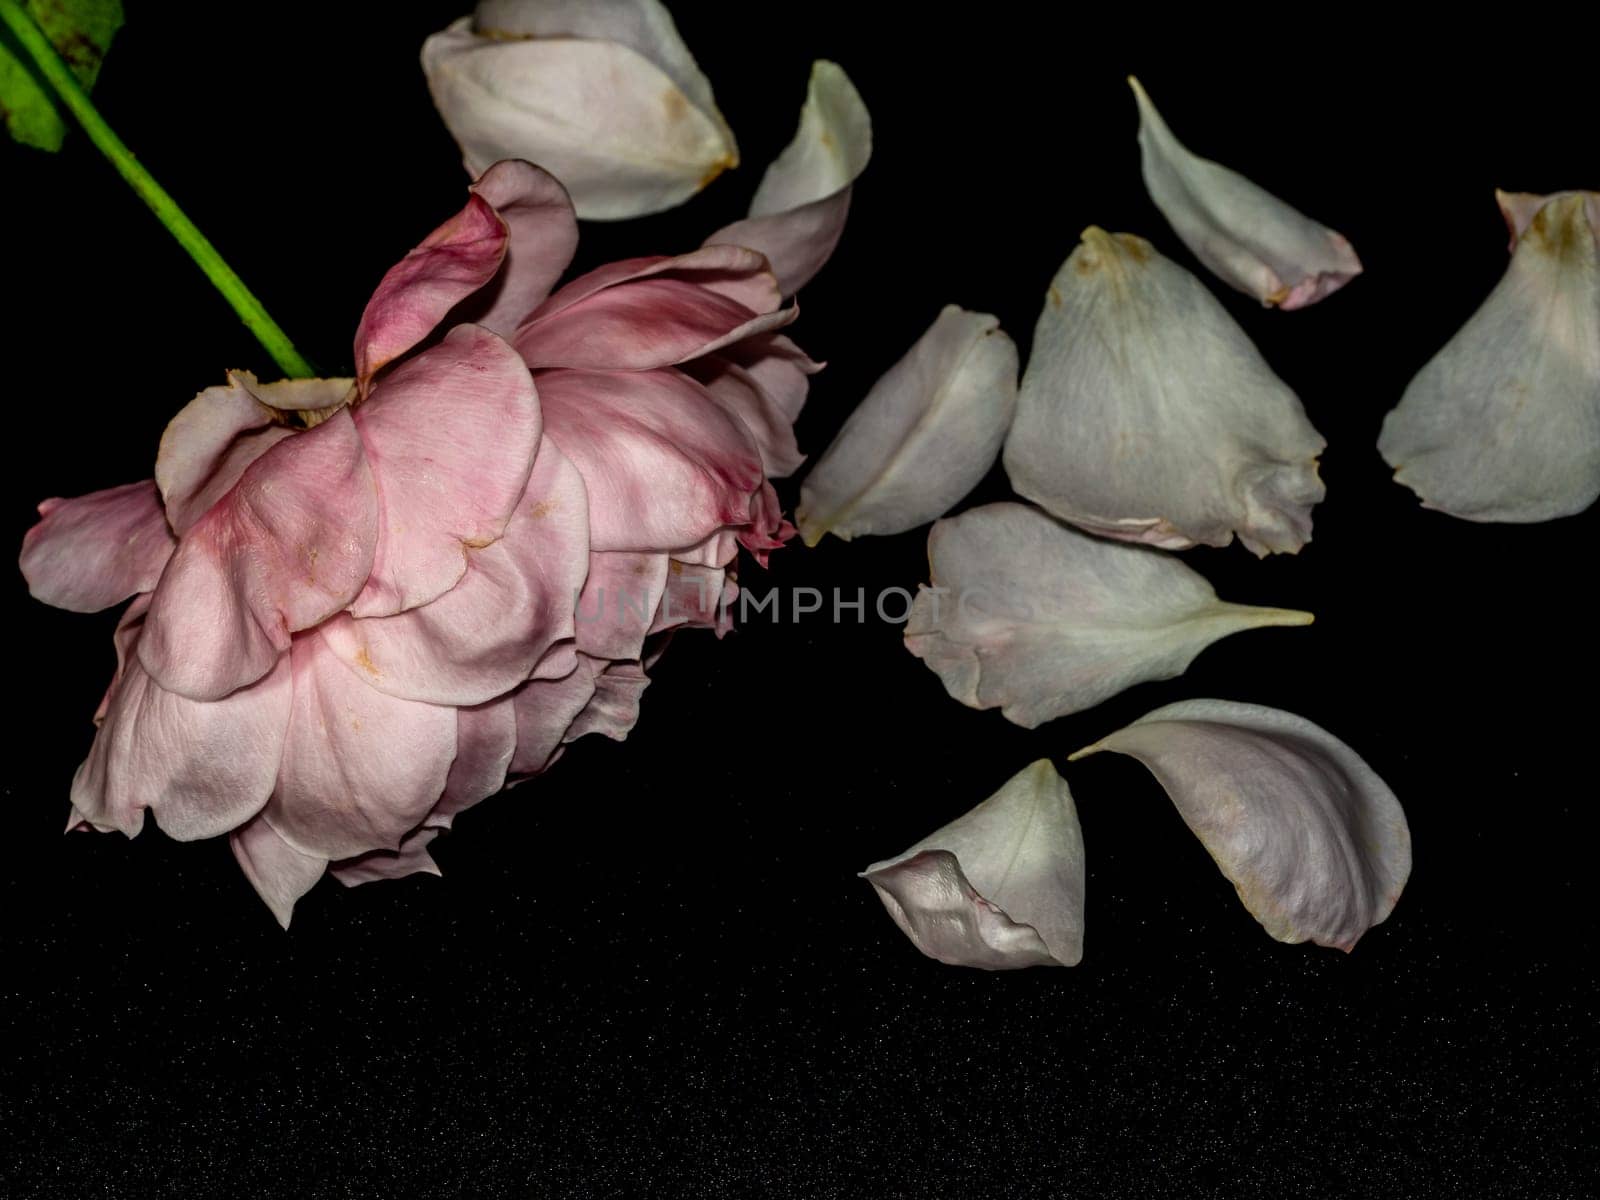 The wounded petals of a withering Plume rose by Satakorn